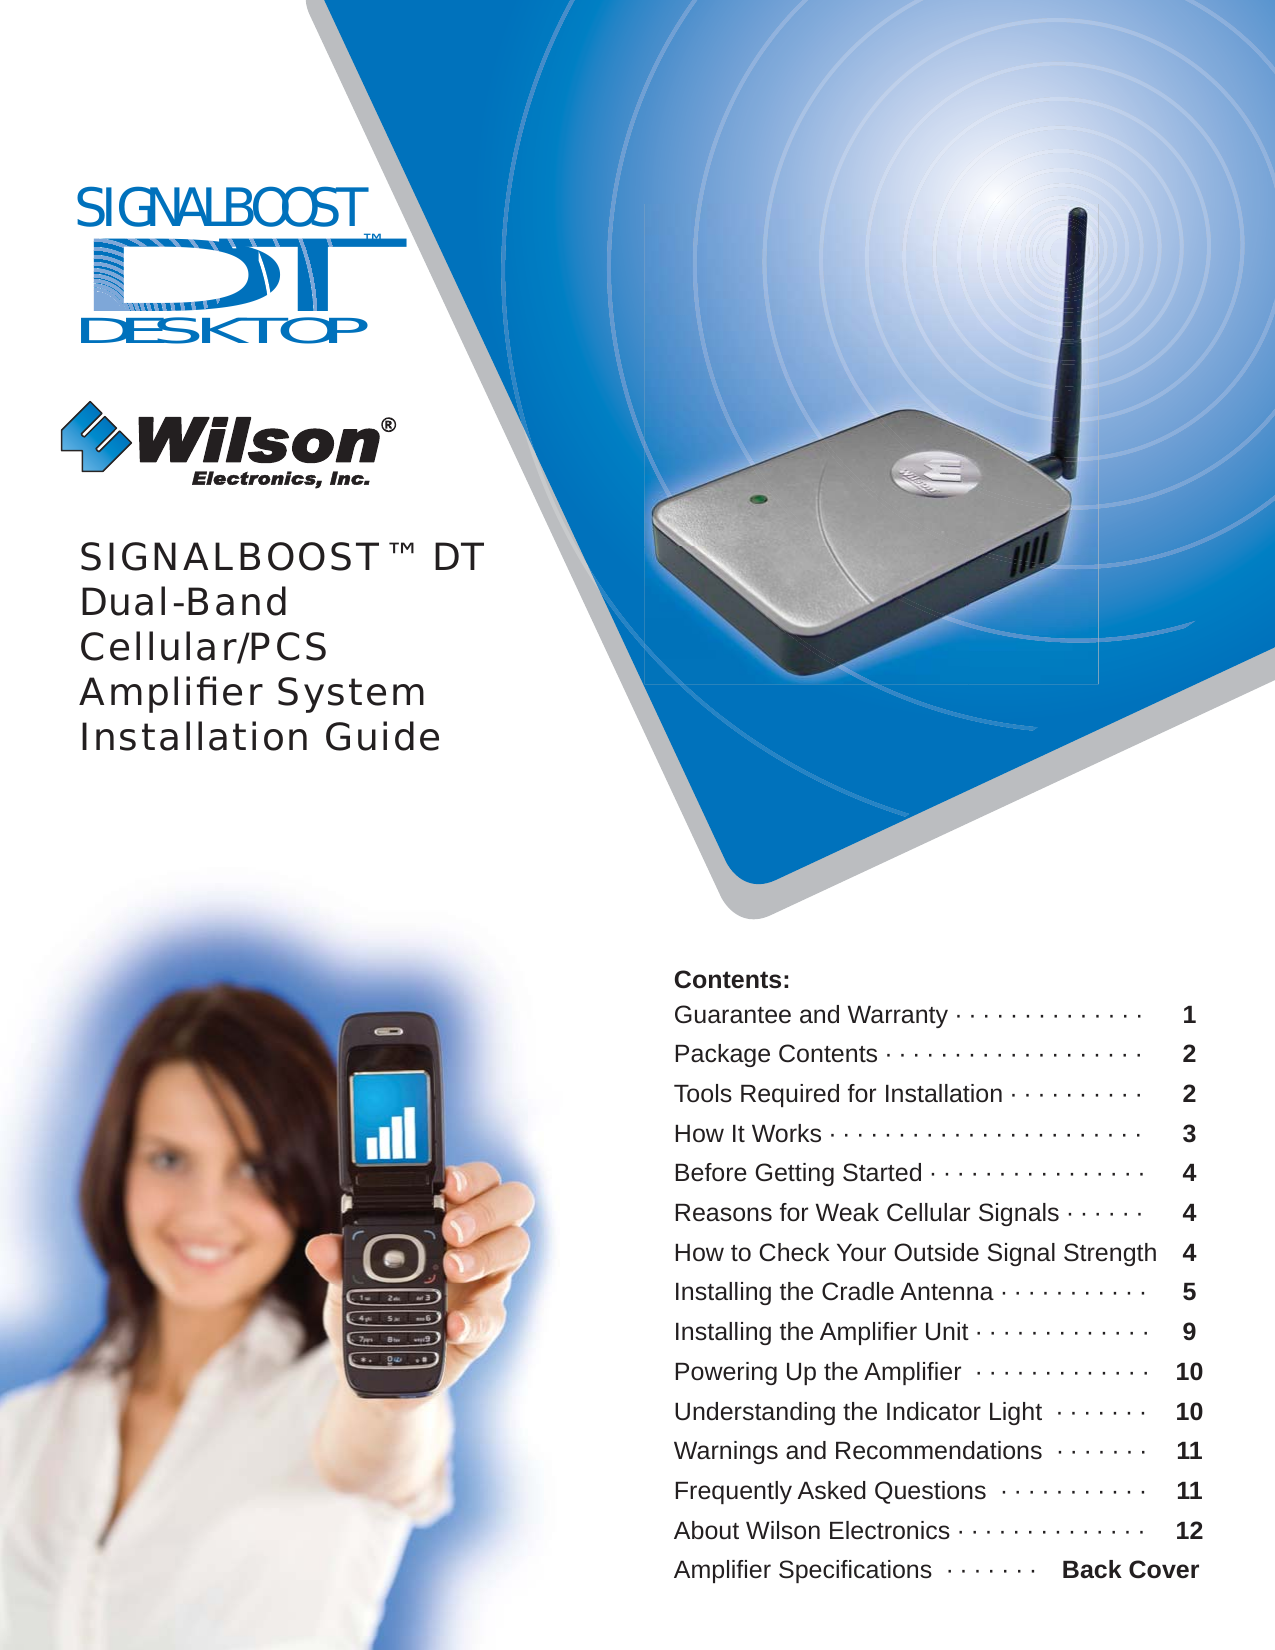 SIGNALBOOST™ DTDual-BandCellular/PCSAmpliﬁ er SystemInstallation GuideContents:Guarantee and Warranty · · · · · · · · · · · · · ·  1Package Contents · · · · · · · · · · · · · · · · · · ·  2Tools Required for Installation · · · · · · · · · ·  2How It Works · · · · · · · · · · · · · · · · · · · · · · ·  3Before Getting Started · · · · · · · · · · · · · · · · 4Reasons for Weak Cellular Signals · · · · · · 4How to Check Your Outside Signal Strength 4Installing the Cradle Antenna · · · · · · · · · · ·  5Installing the Ampliﬁ er Unit · · · · · · · · · · · · ·  9Powering Up the Ampliﬁ er  · · · · · · · · · · · · ·  10Understanding the Indicator Light  · · · · · · ·  10Warnings and Recommendations  · · · · · · ·  11Frequently Asked Questions  · · · · · · · · · · · 11About Wilson Electronics · · · · · · · · · · · · · · 12Ampliﬁ er Speciﬁ cations  · · · · · · ·  Back CoverSIGNALBOOSTDT™DESKTOPTDDDDDDDDDDD